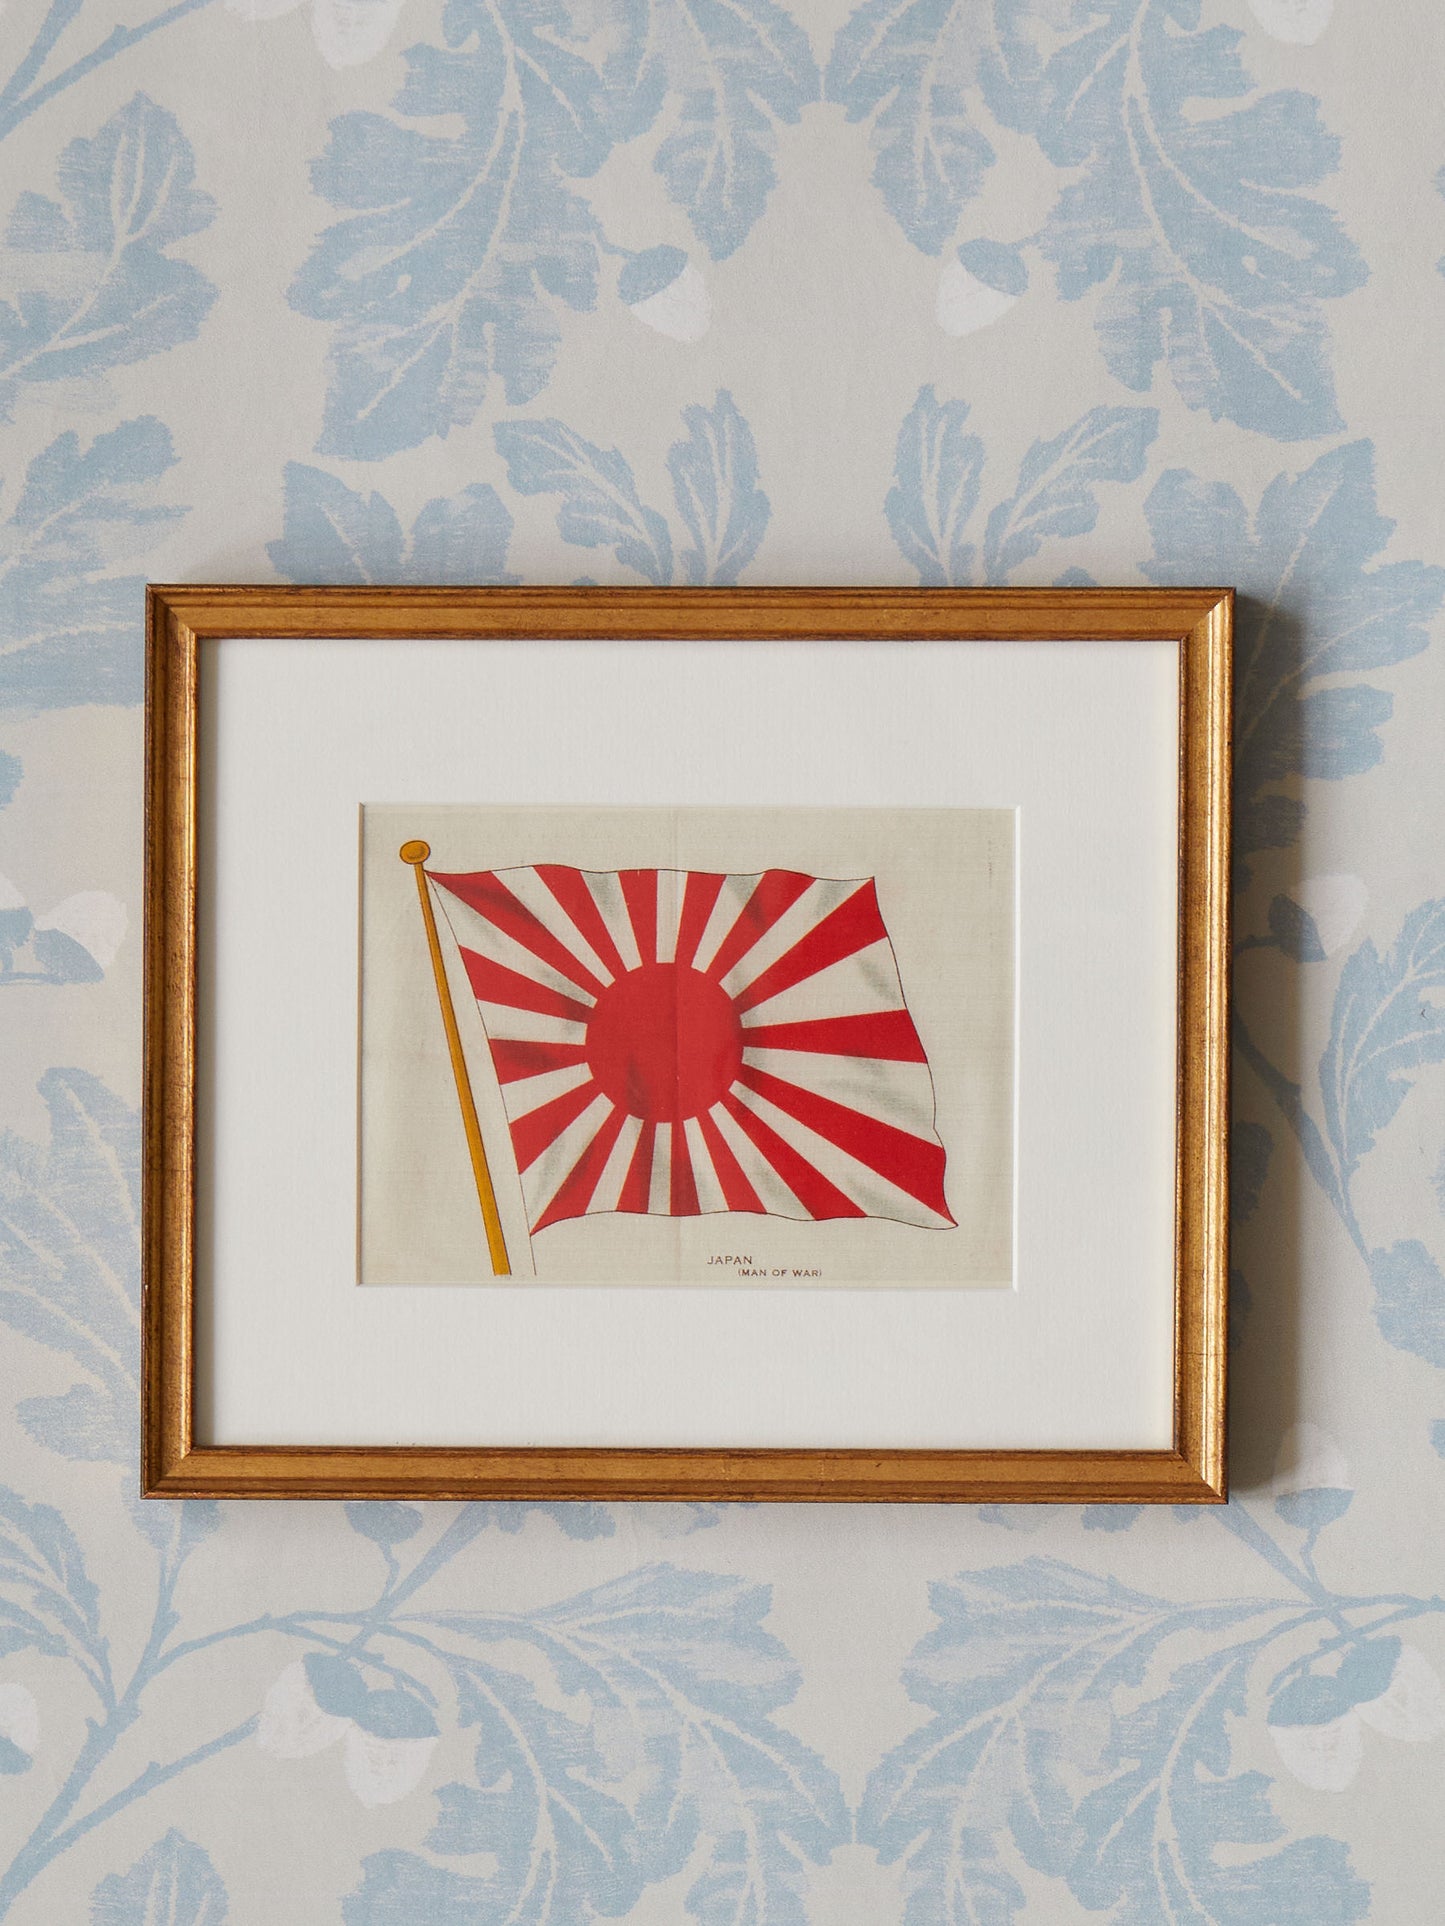 An Early 20th Century Handpainted Silk Flag of Japan